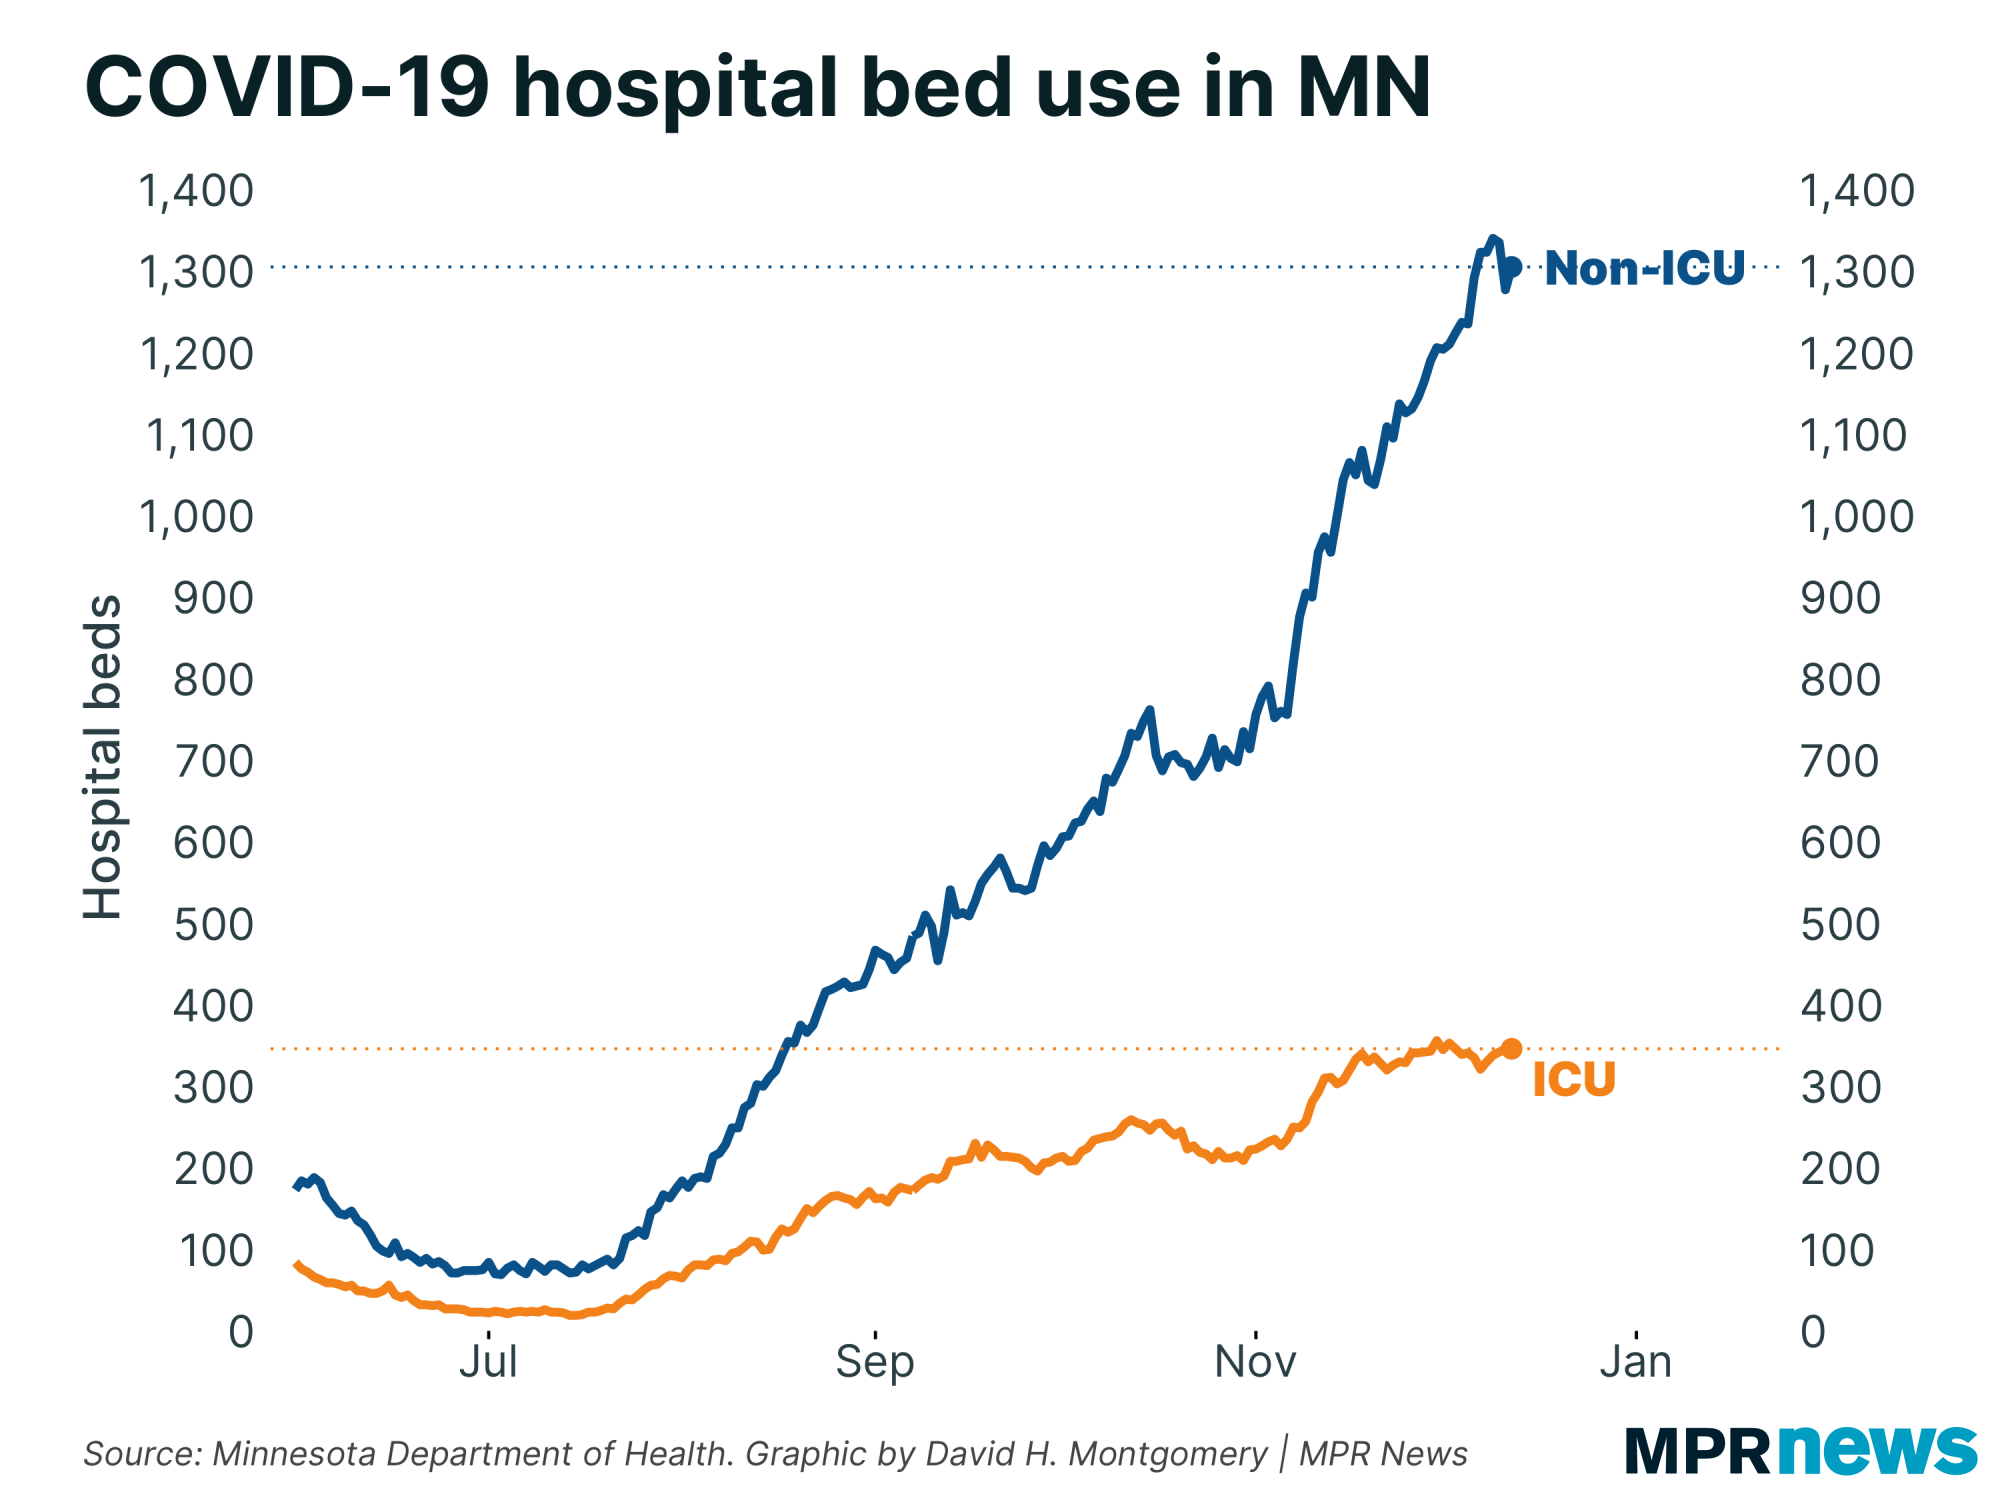 Graph of COVID-19 hospital bed use by bed type